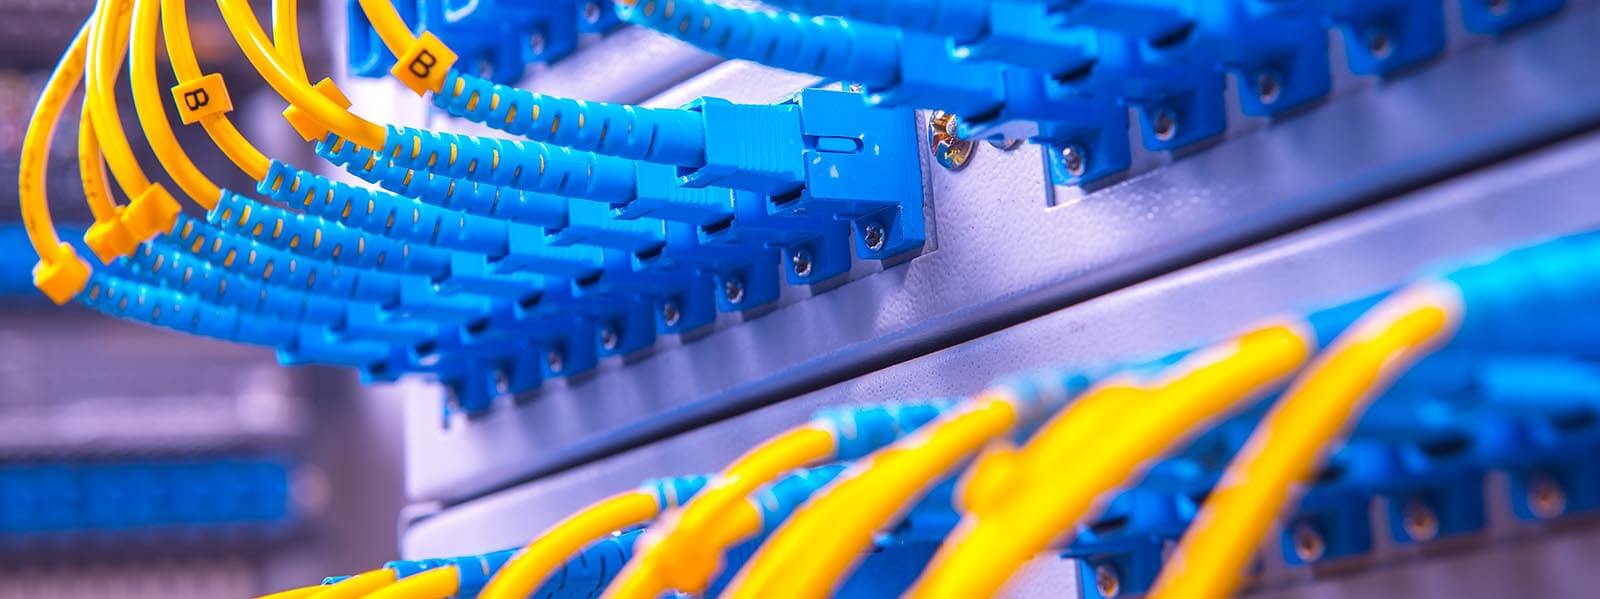 Business Structured Cabling Infrastructures